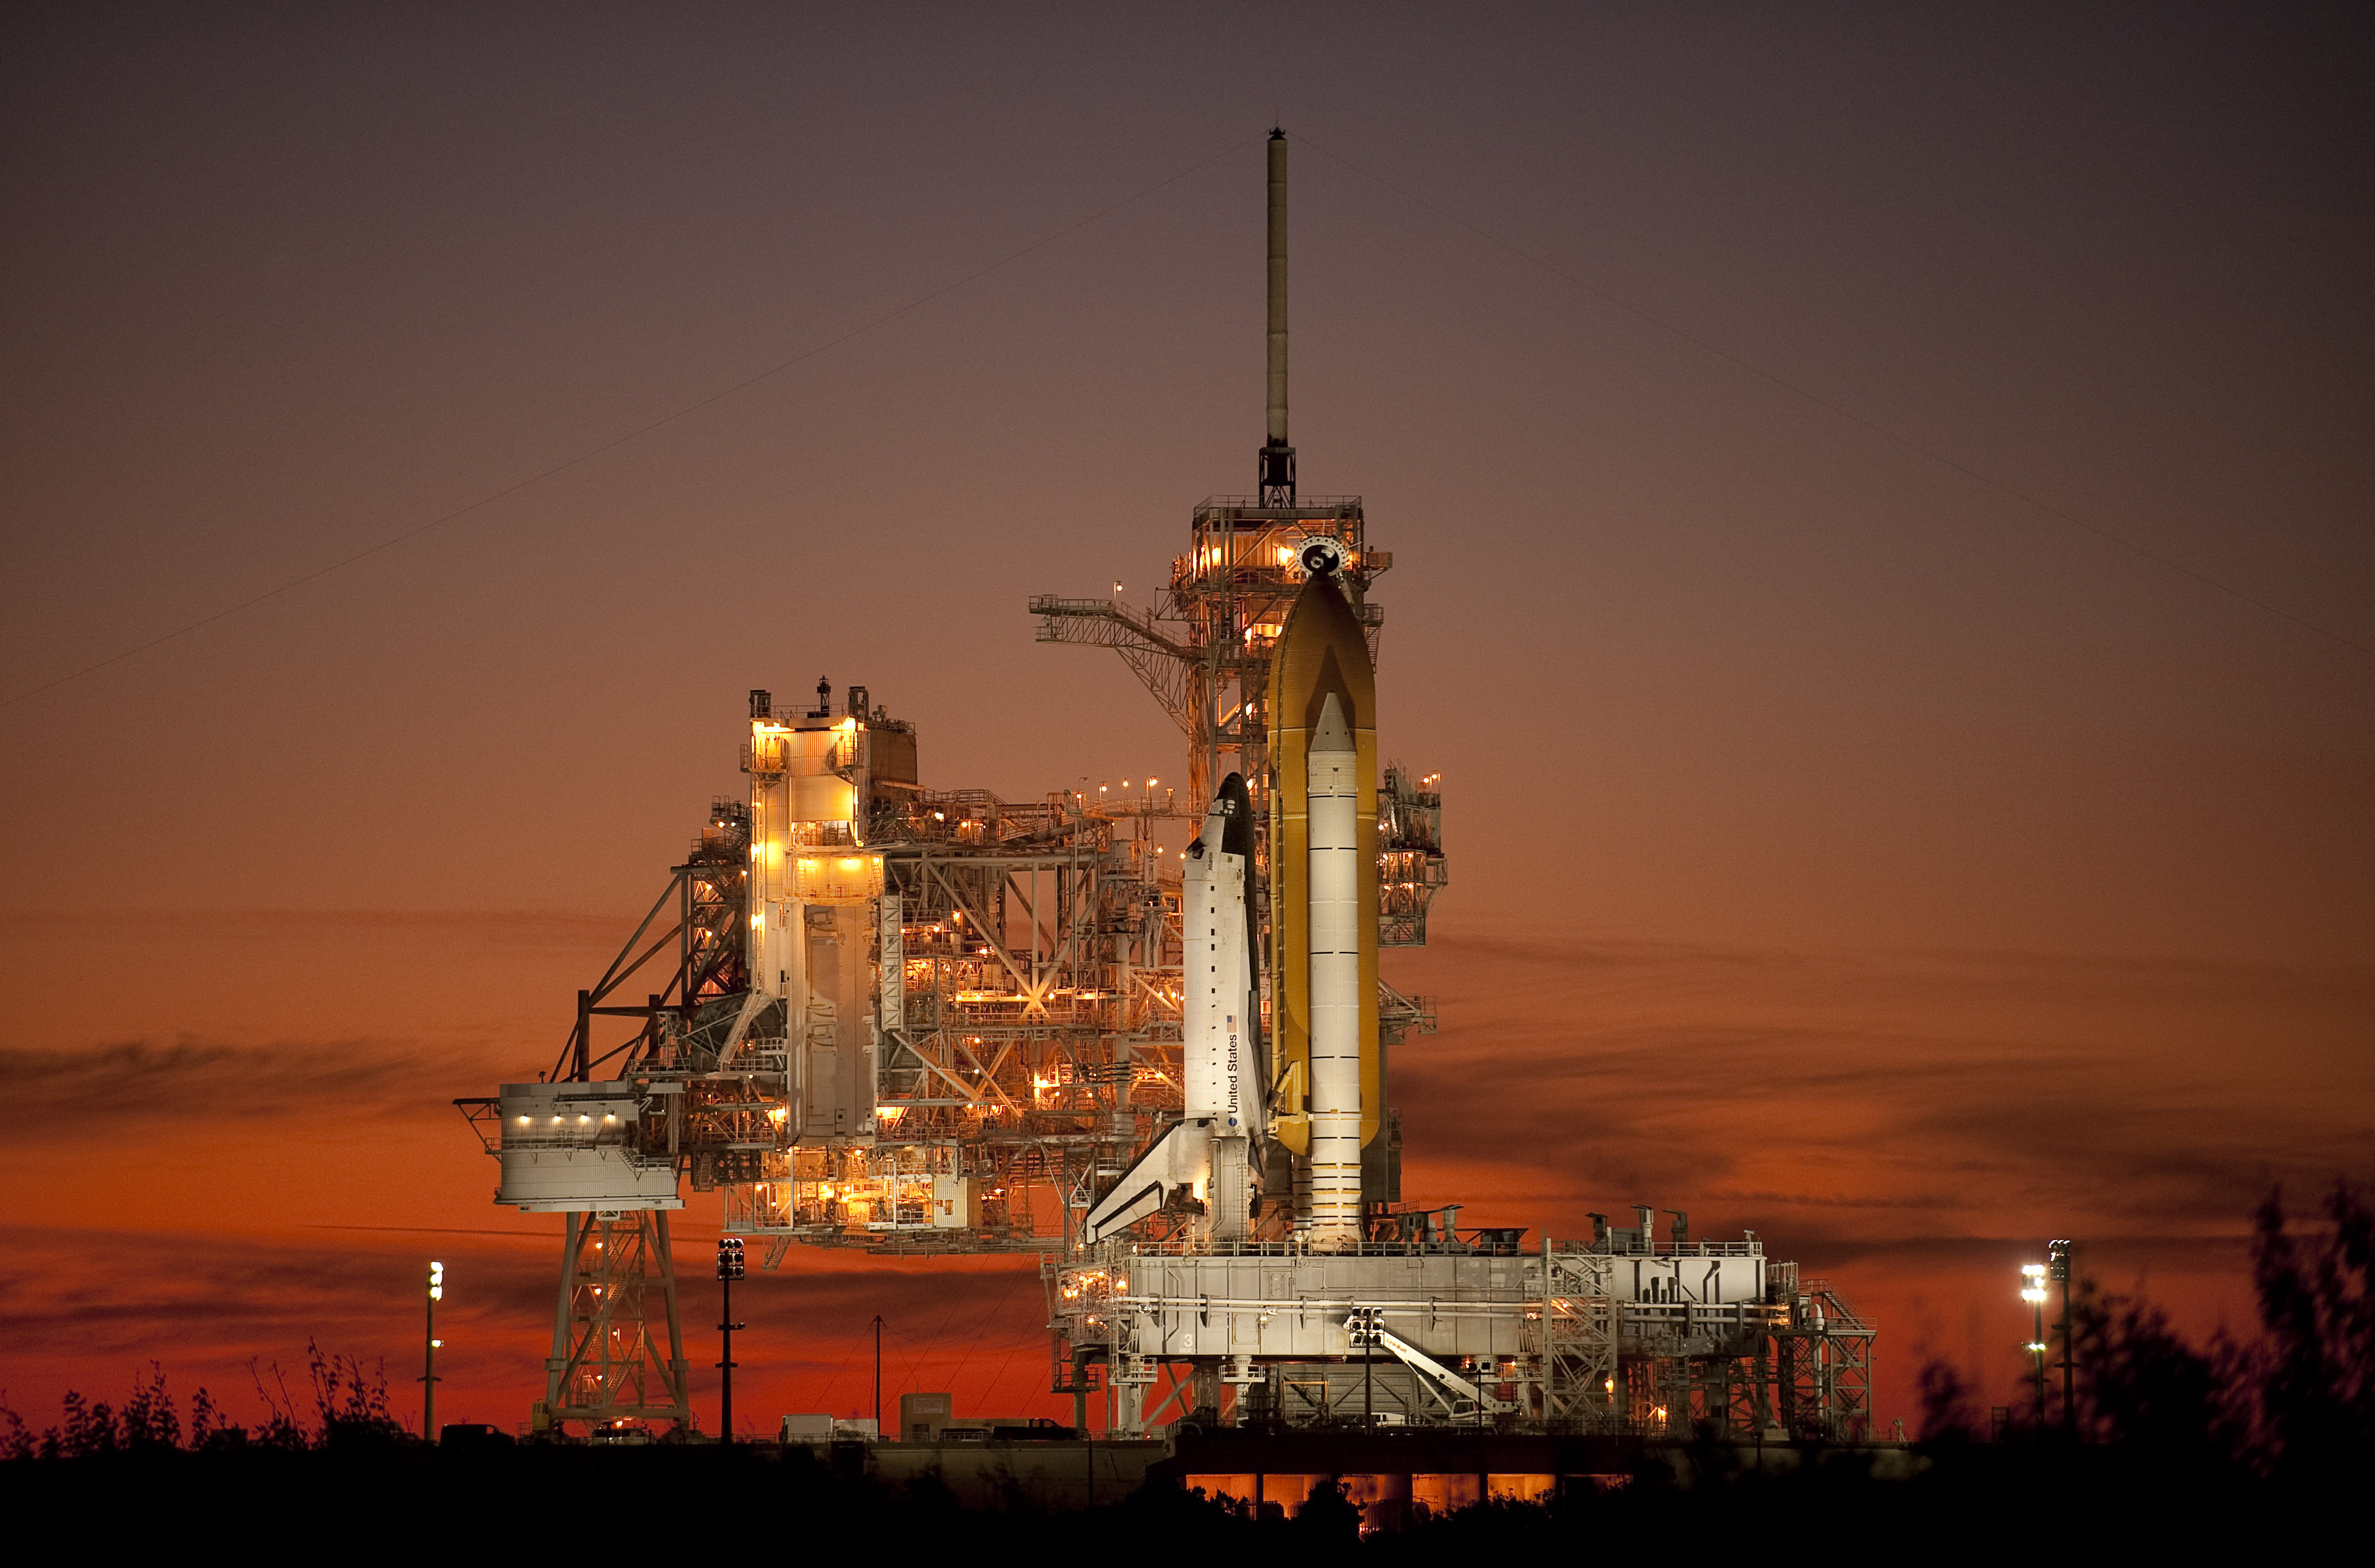 The space shuttle Atlantis is seen on launch pad 39a of the NASA Kennedy Space Center shortly after the rotating service structure was rolled back, Sunday, Nov. 15, 2009, Cape Canaveral, FL.